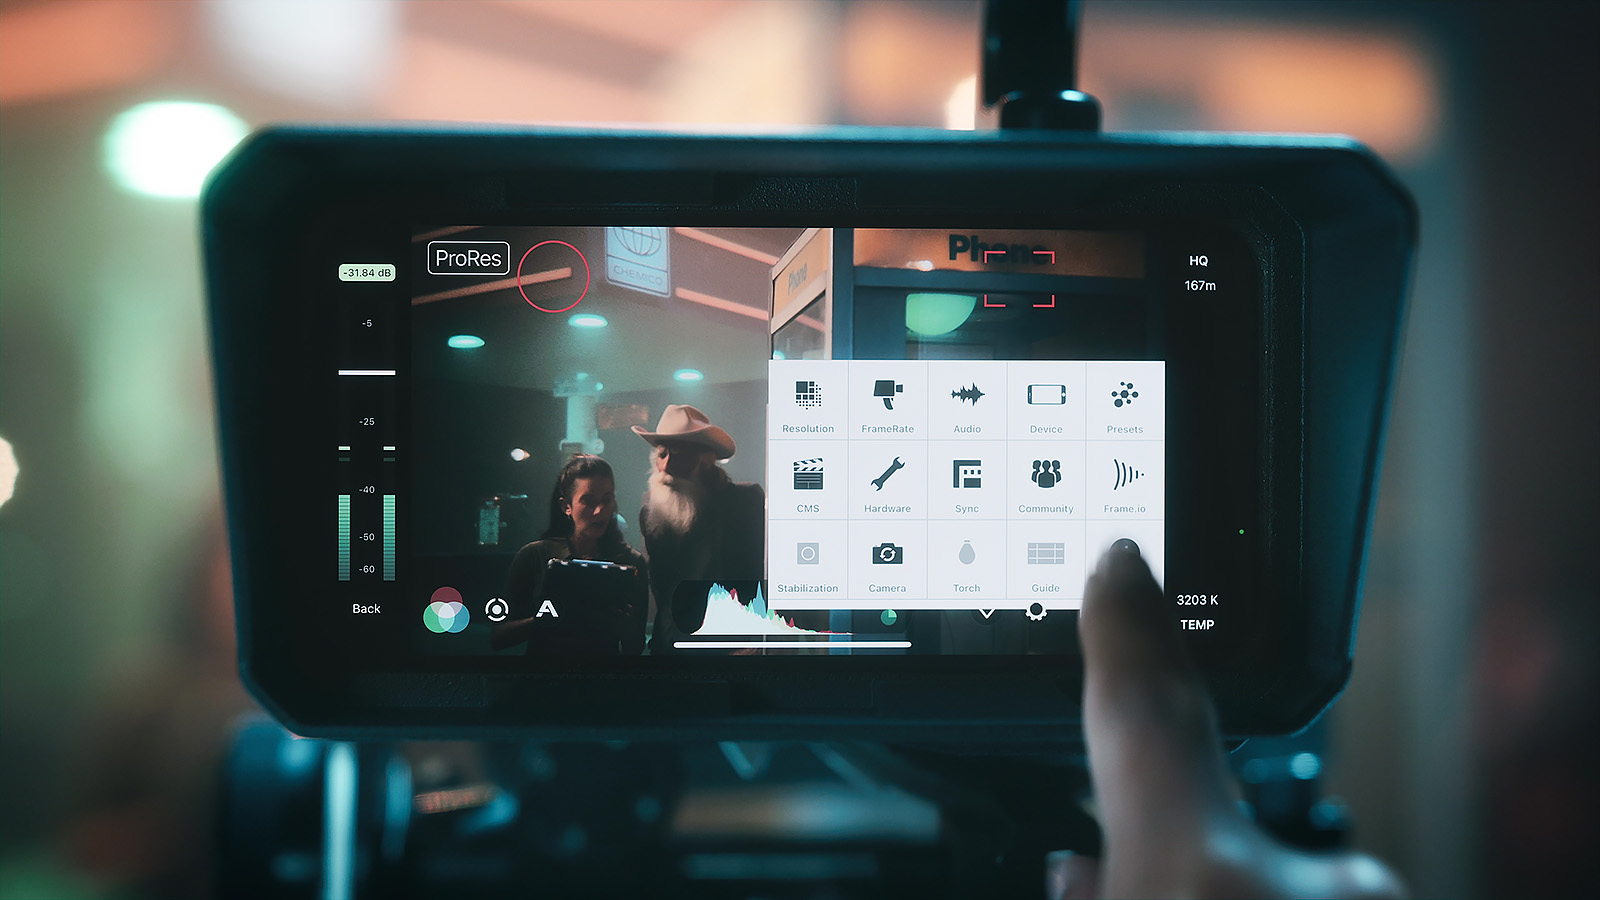 Filmic Pro brings advanced features to smartphone filmmakers